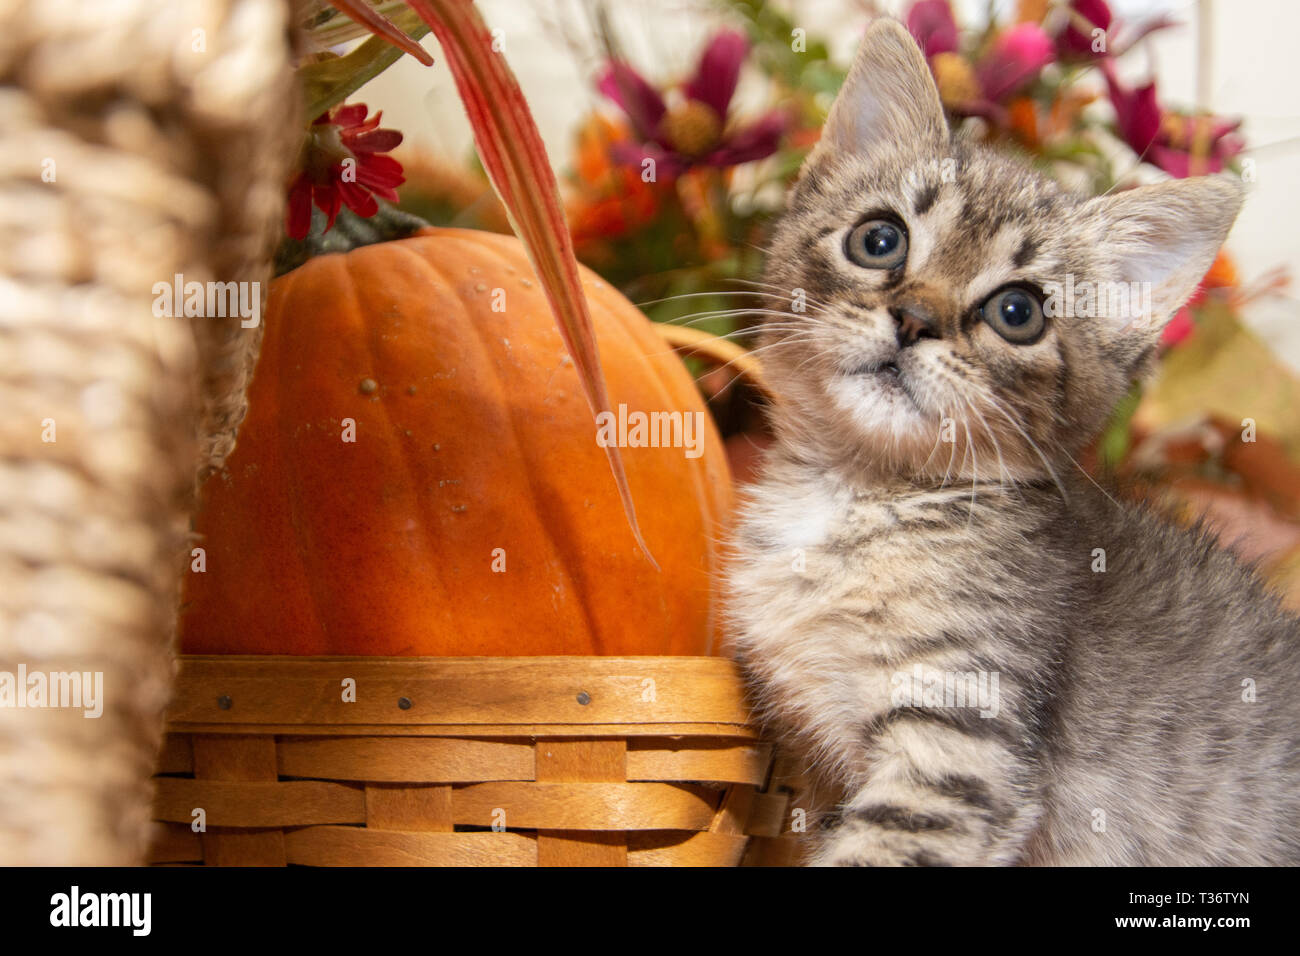 A young orphaned kitten, recently rescued, is curious about her new environment & all the autumn decorations that surround her. Stock Photo